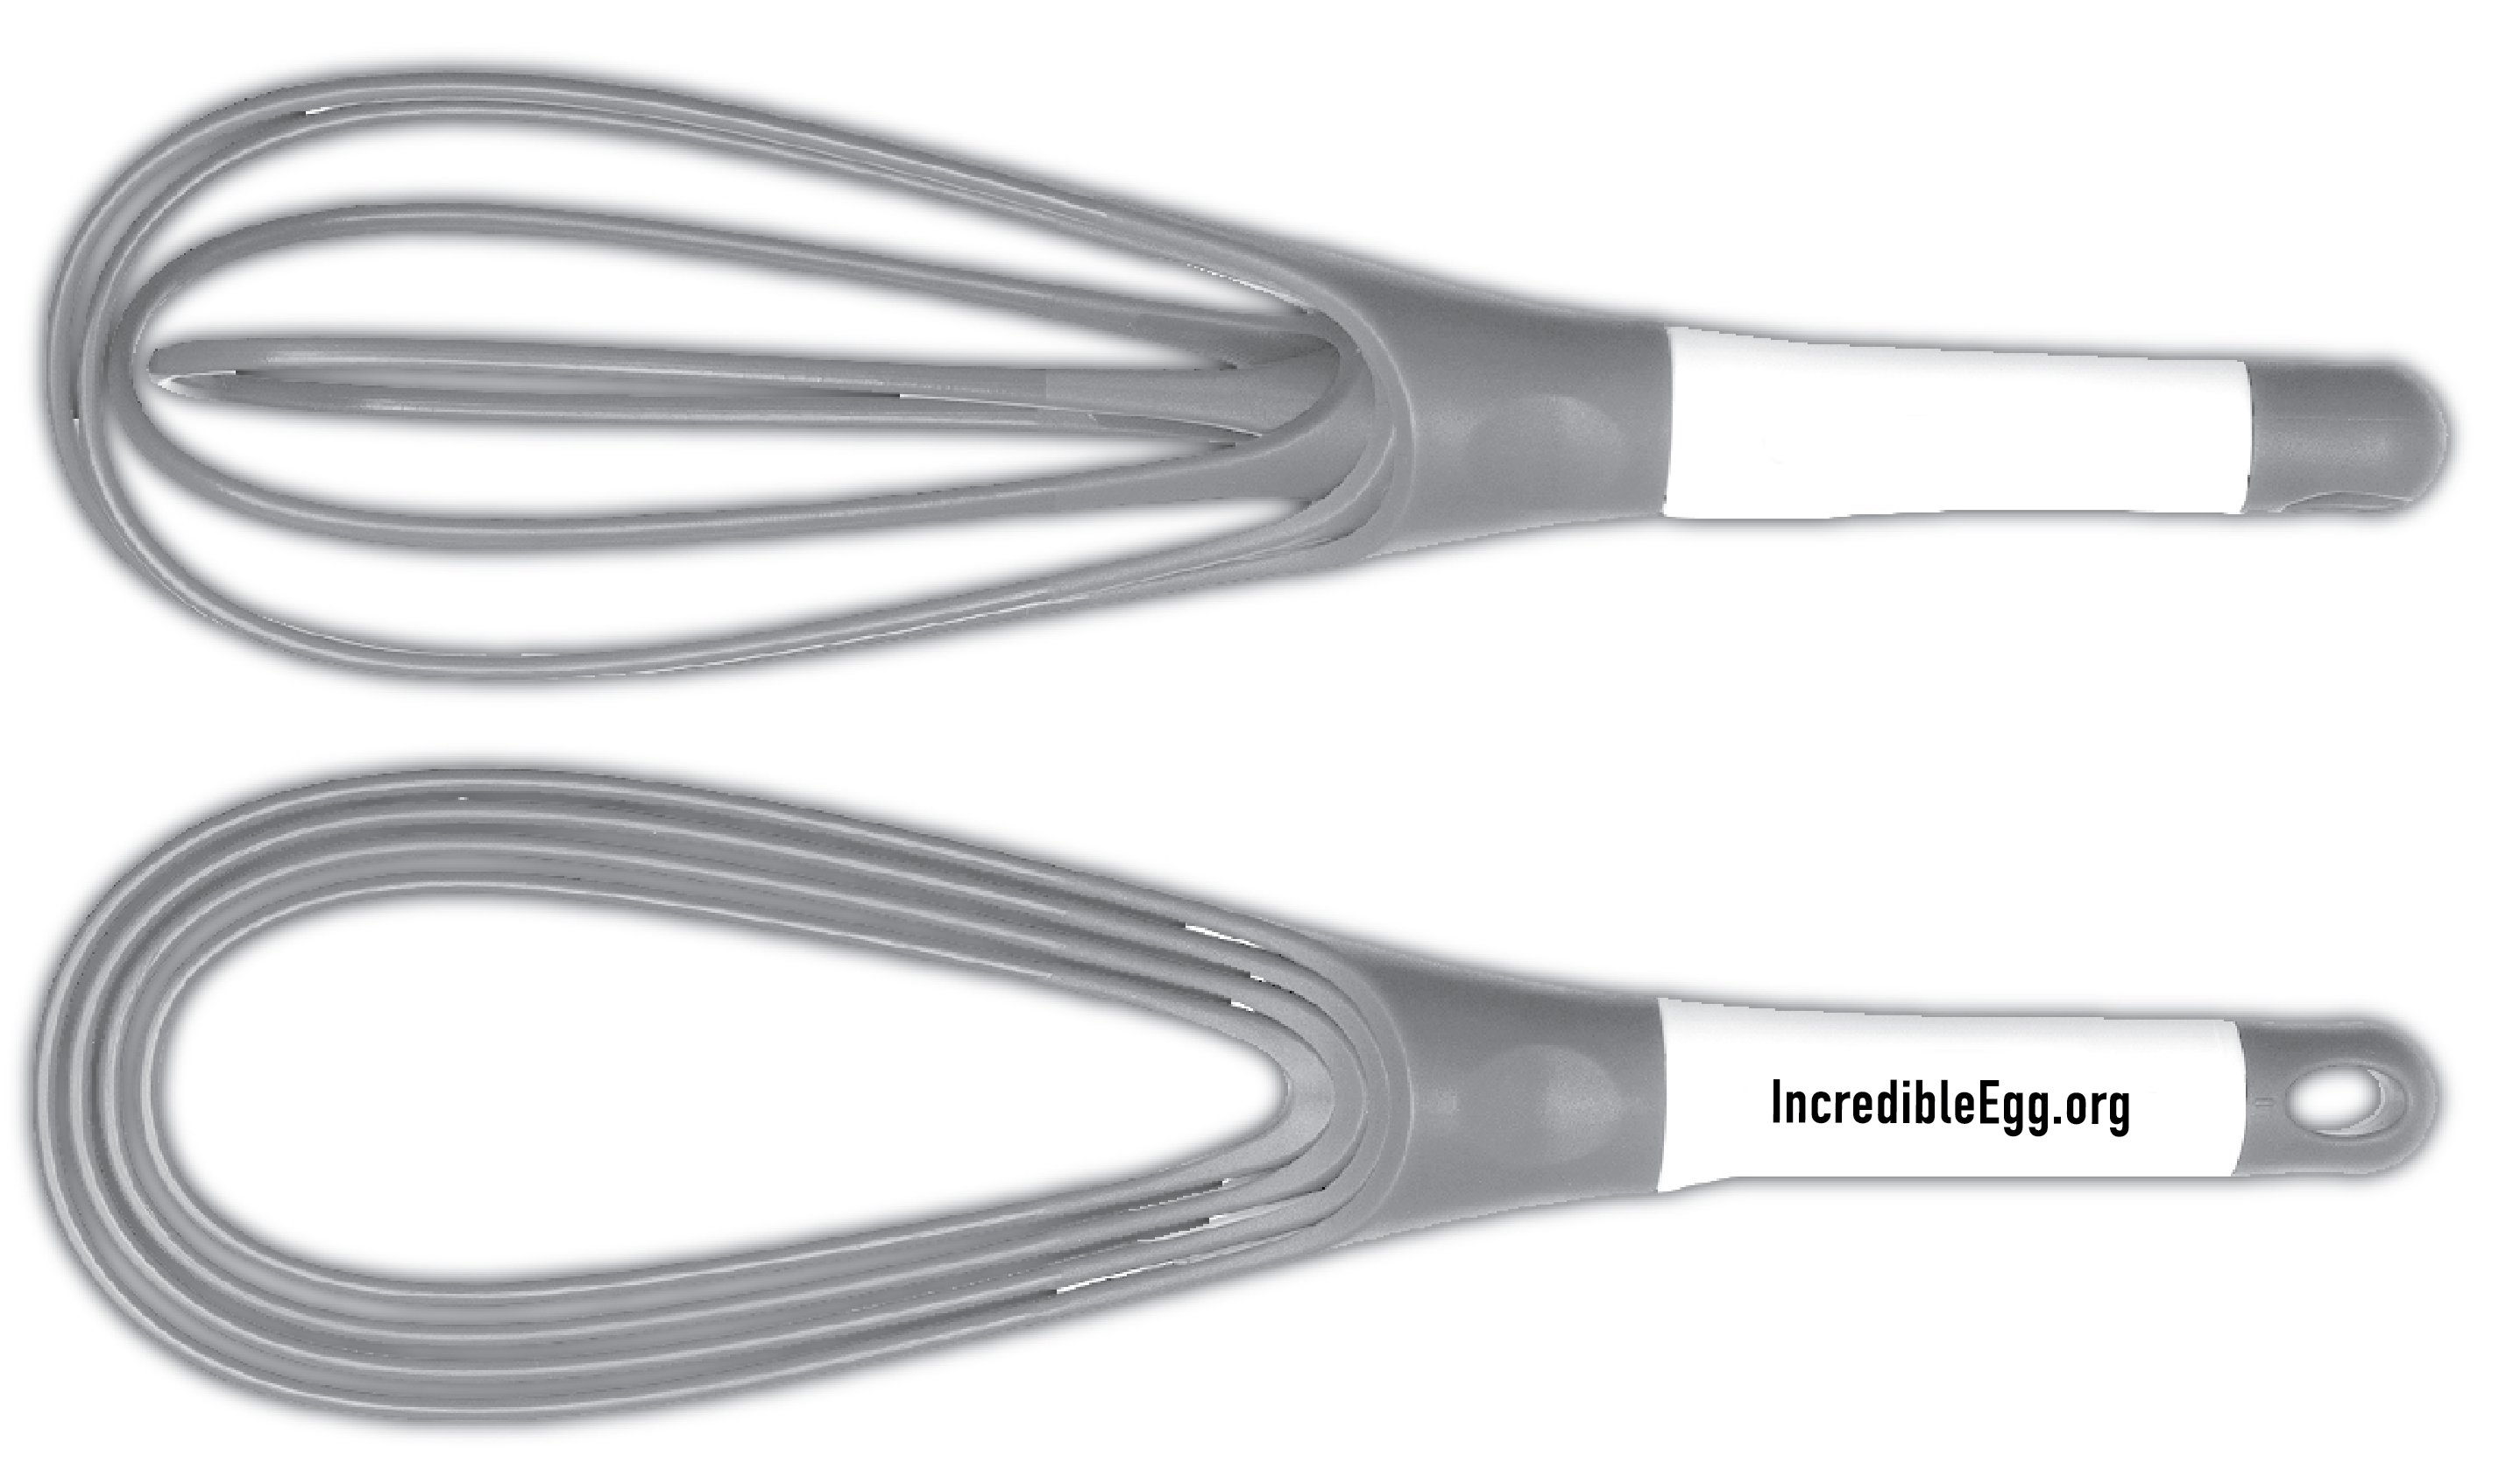 https://aeb.finerline.com/images/products/637592774318300819AEB-508%20-%20Collapsible%20Whisk.jpg